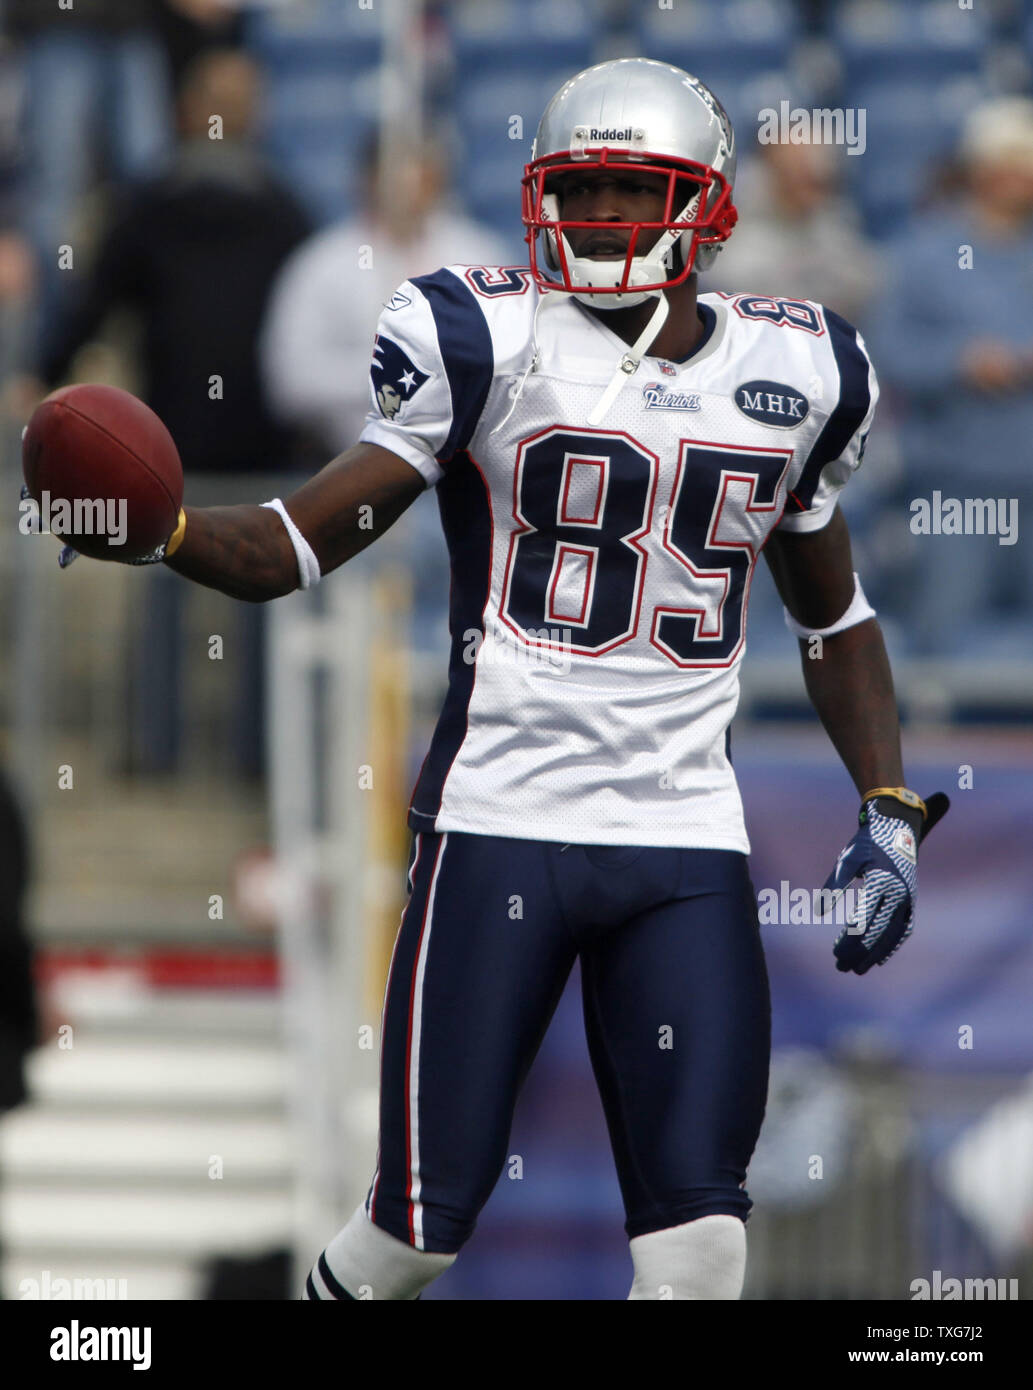 New England Patriots wide receiver Chad Ochocinco grabs a football while  warming up with teammates before the game against the Dallas Cowboys at  Gillette Stadium in Foxboro, Massachusetts on October 16, 2011.